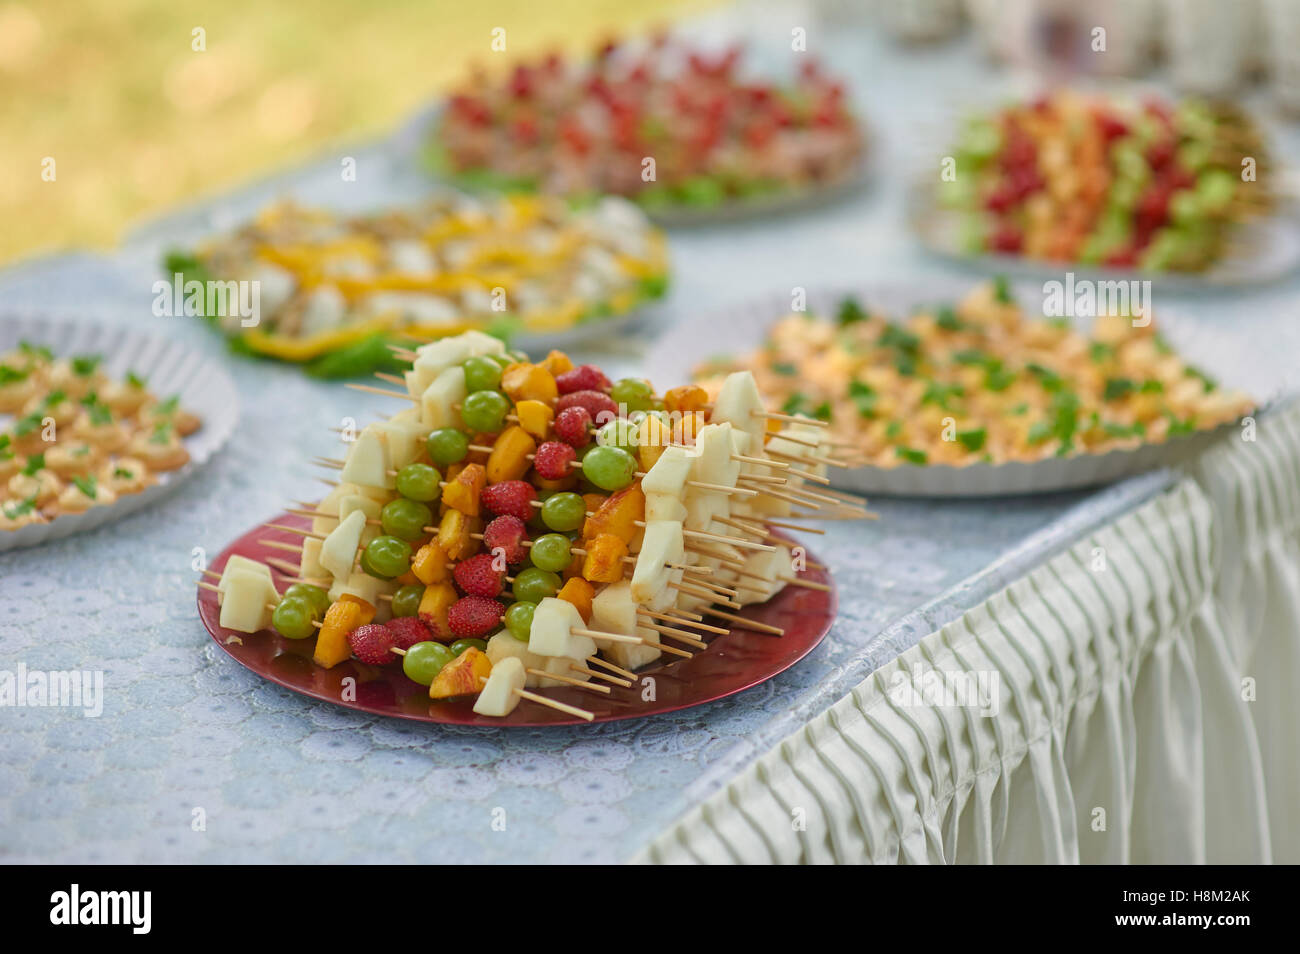 fruits for a wedding buffet Stock Photo